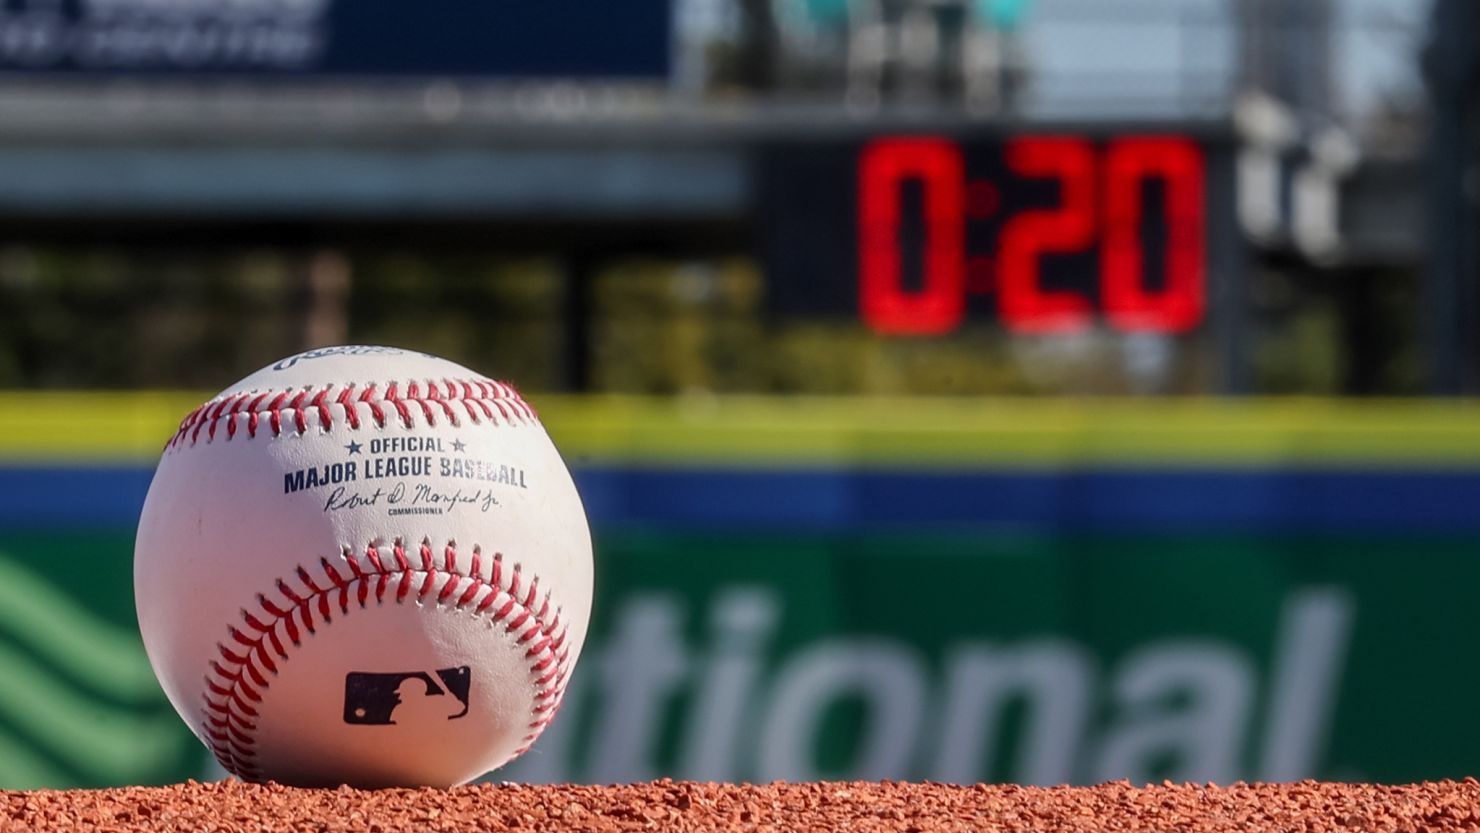 A detail shot of an Official Rawlings baseball on the field with a pitch clock in the background at TD Ballpark on Wednesday, February 15 in Dunedin, Florida.